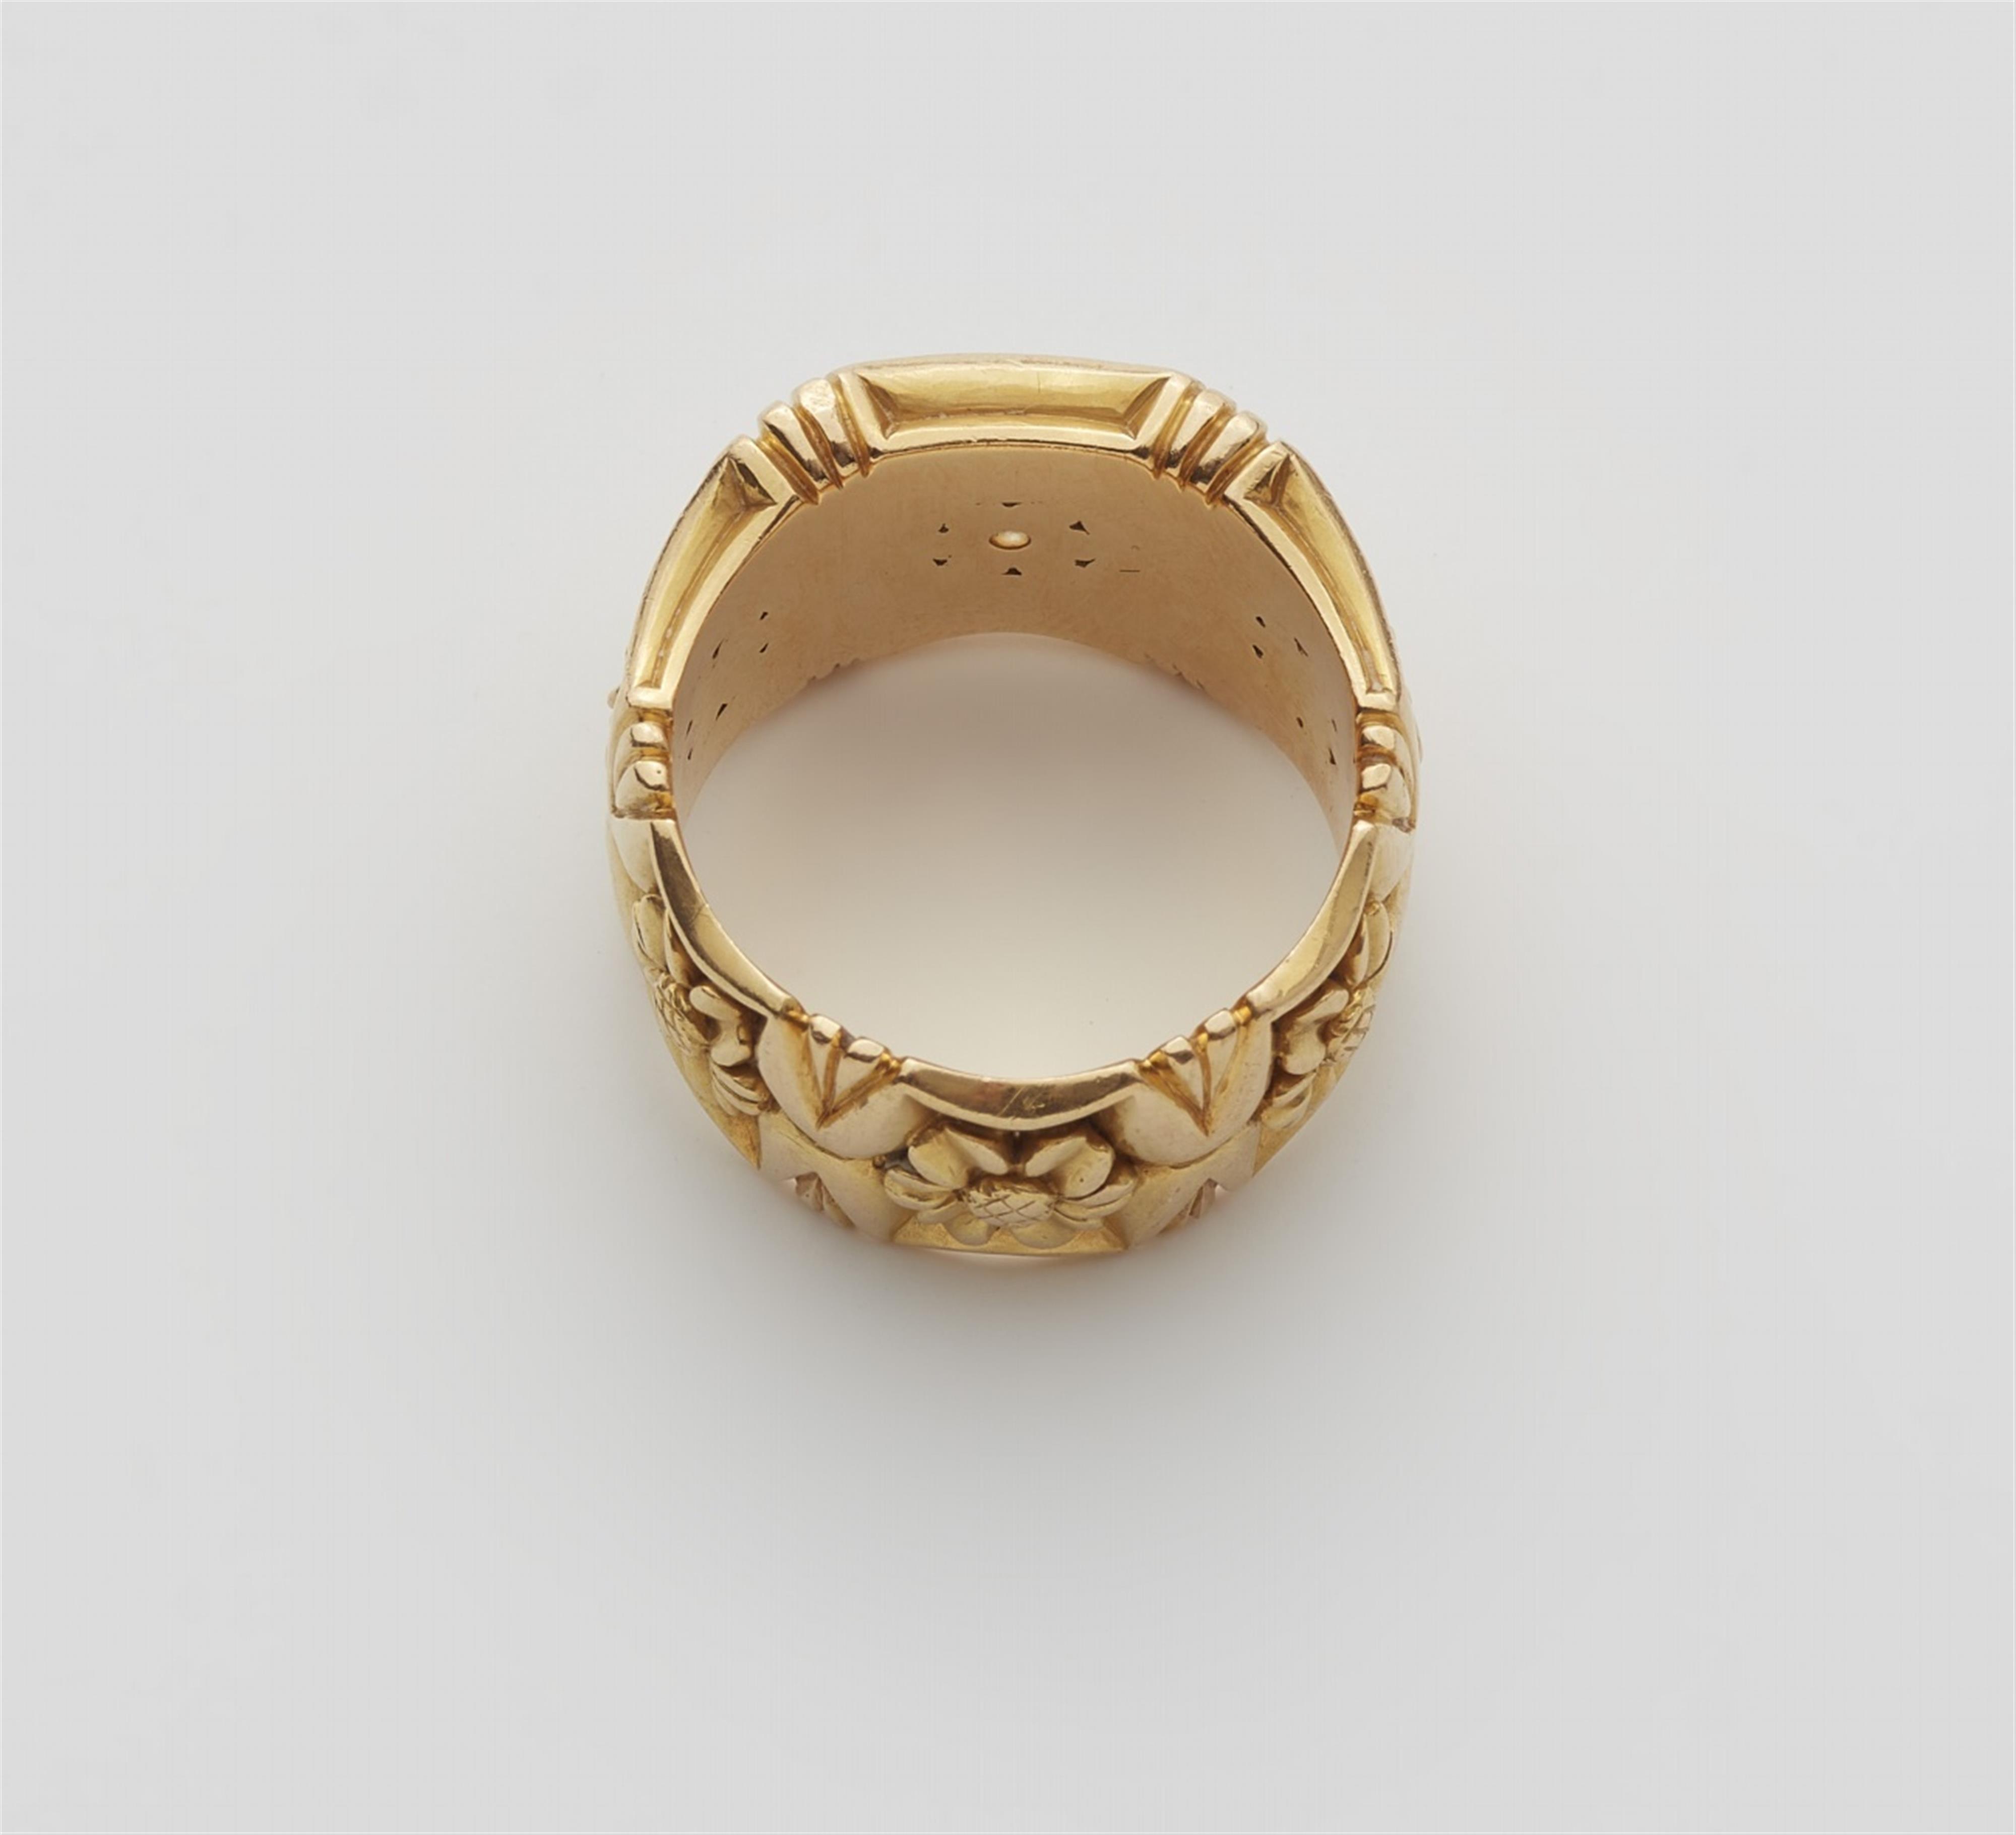 An 18k gold “gritli“ ring with a diamond solitaire - image-3